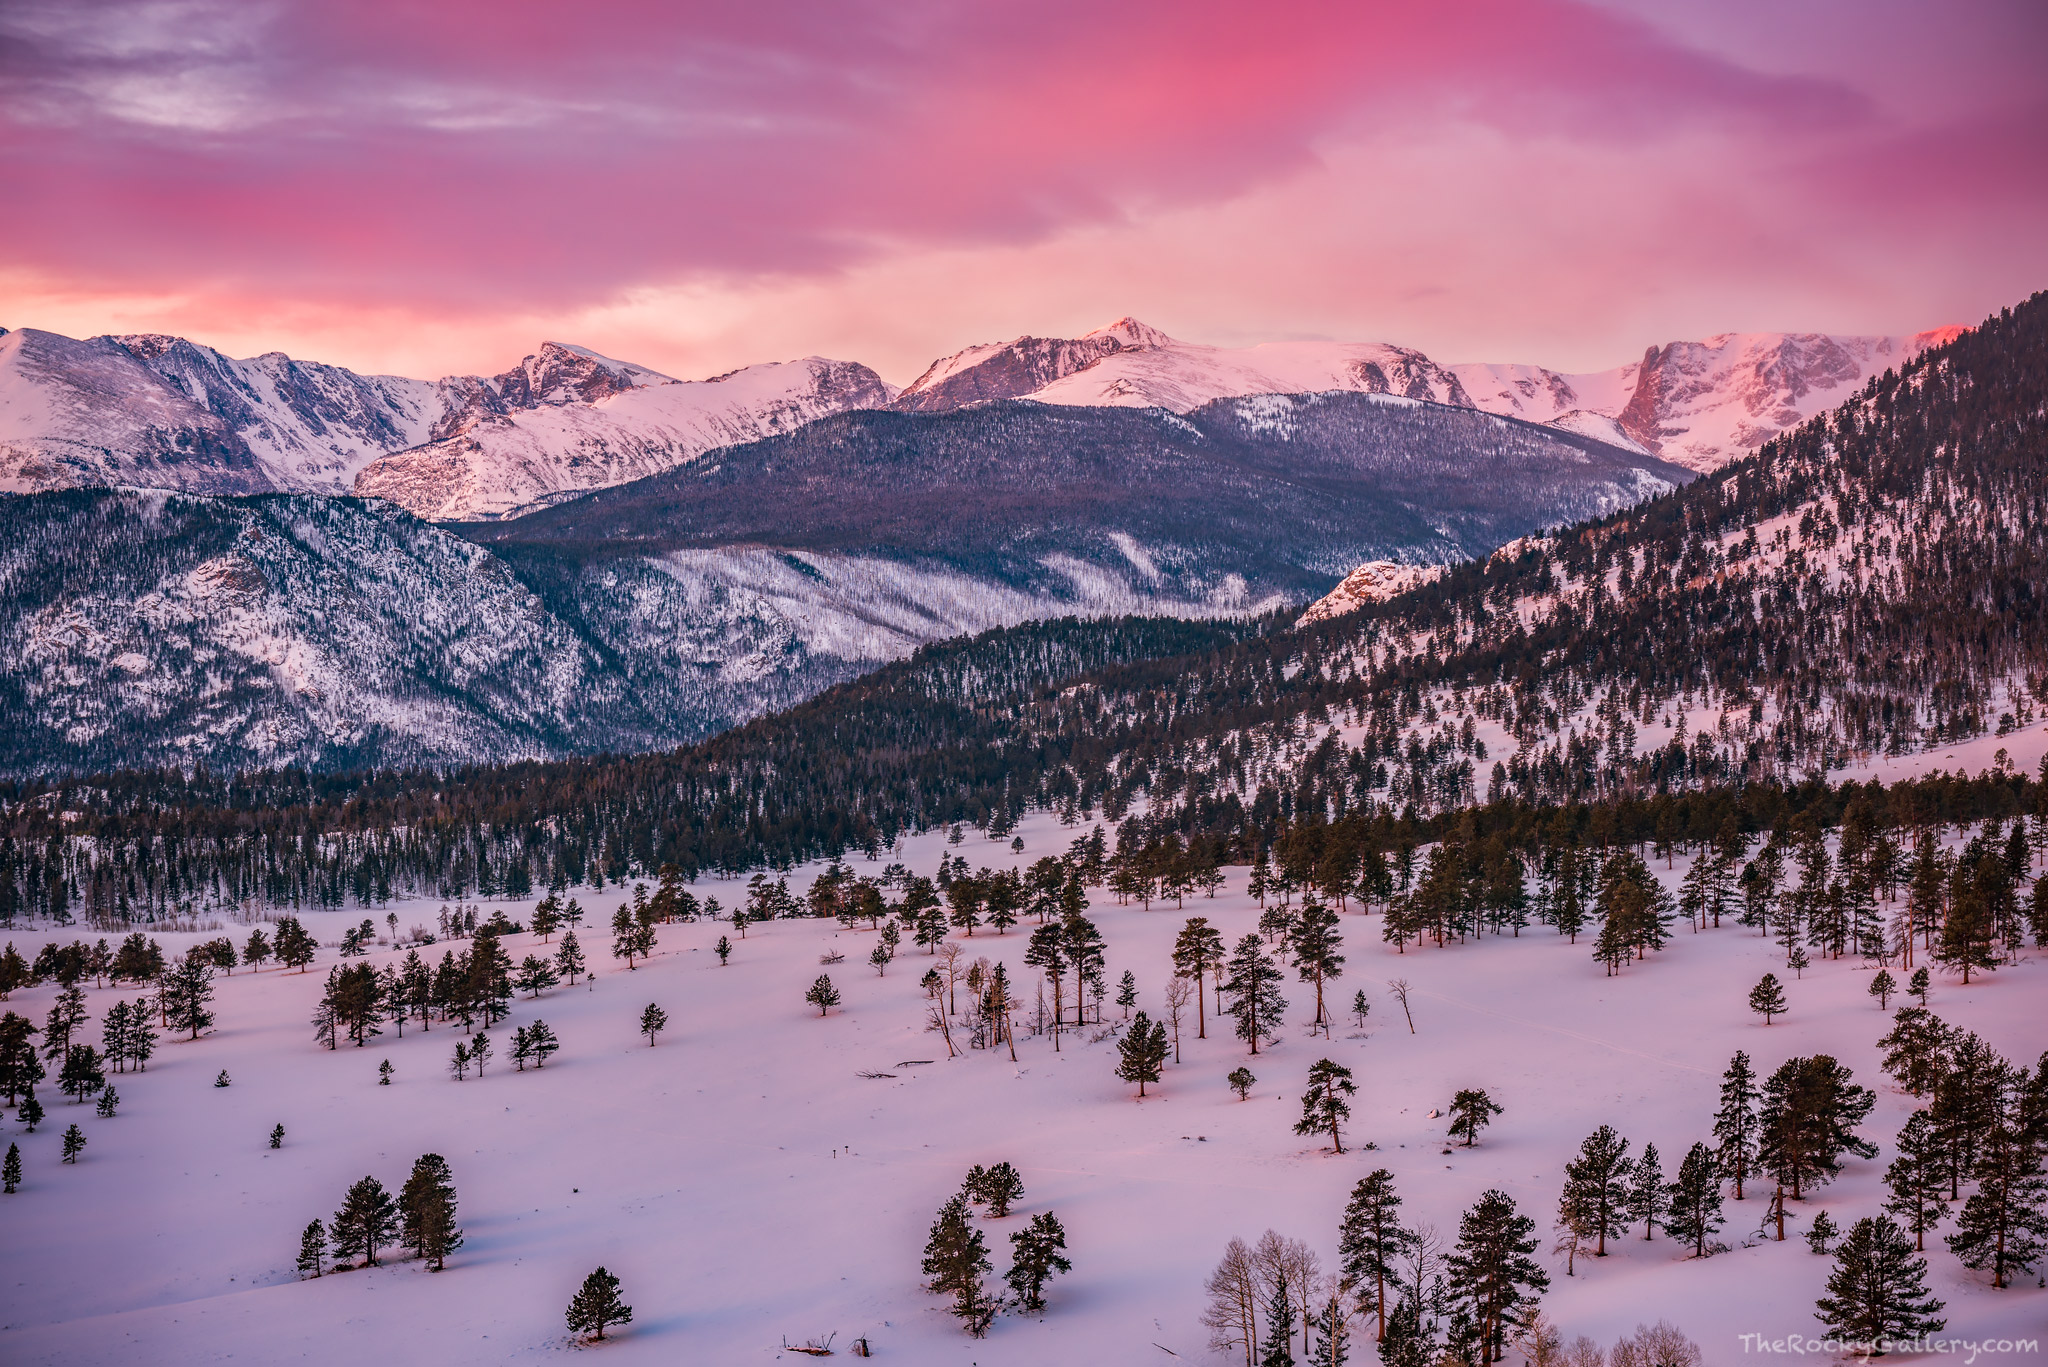 Winter sunrises over Rocky Mountain National Park can be quite spectacular. When everything comes together wtih clouds and snow...